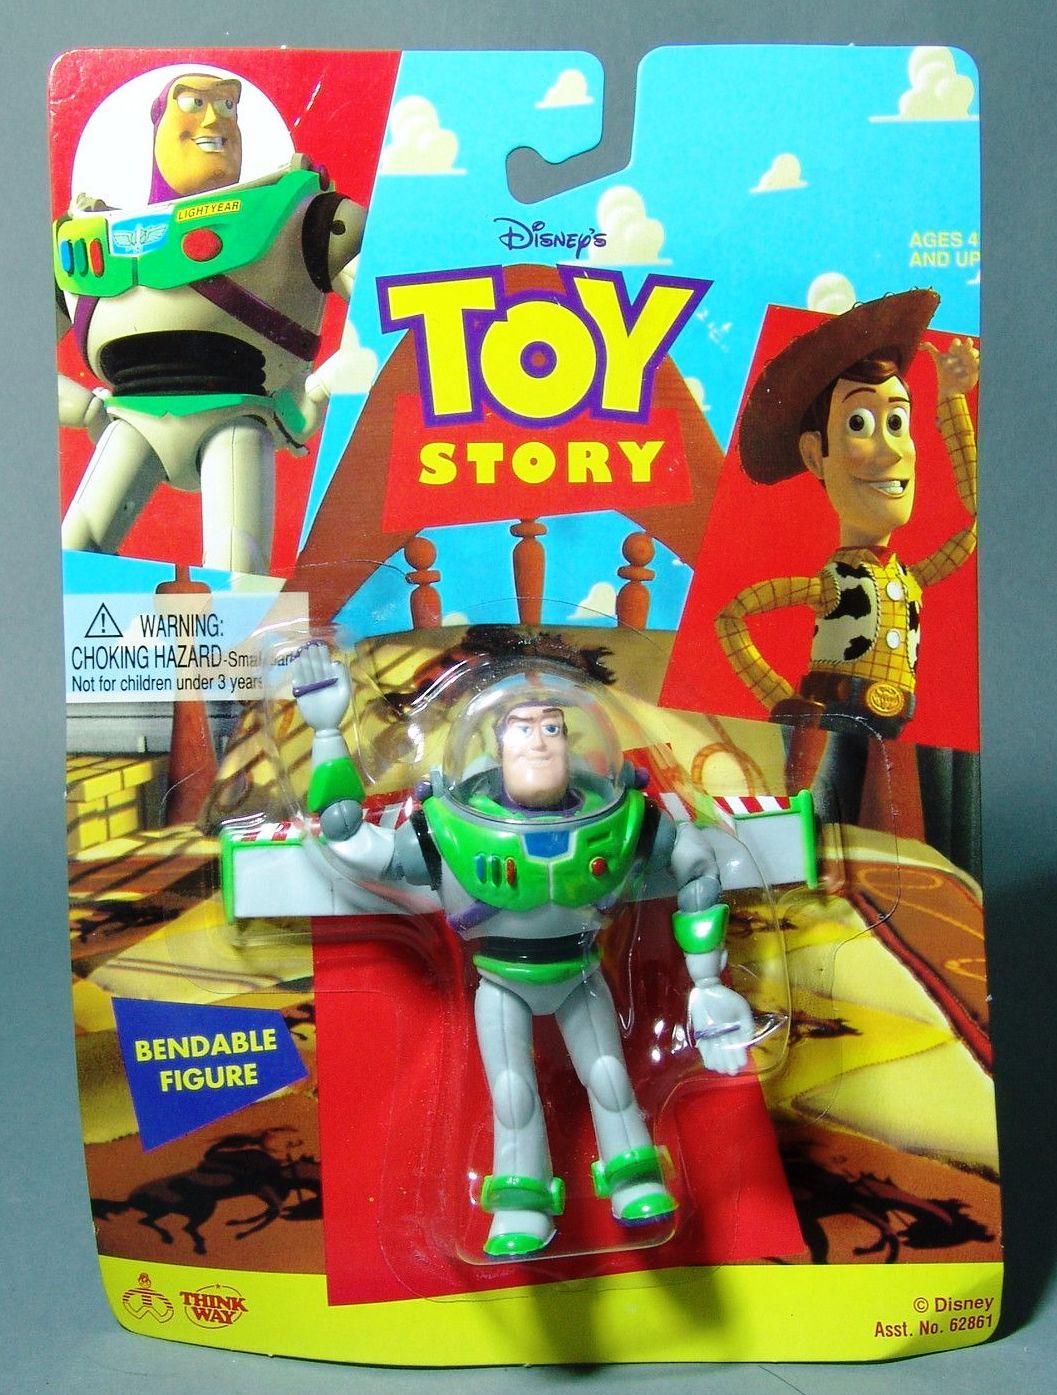 Toy Story Large poseable 18" "Happy Birthday" Buzz Lightyear with Alien Plush!